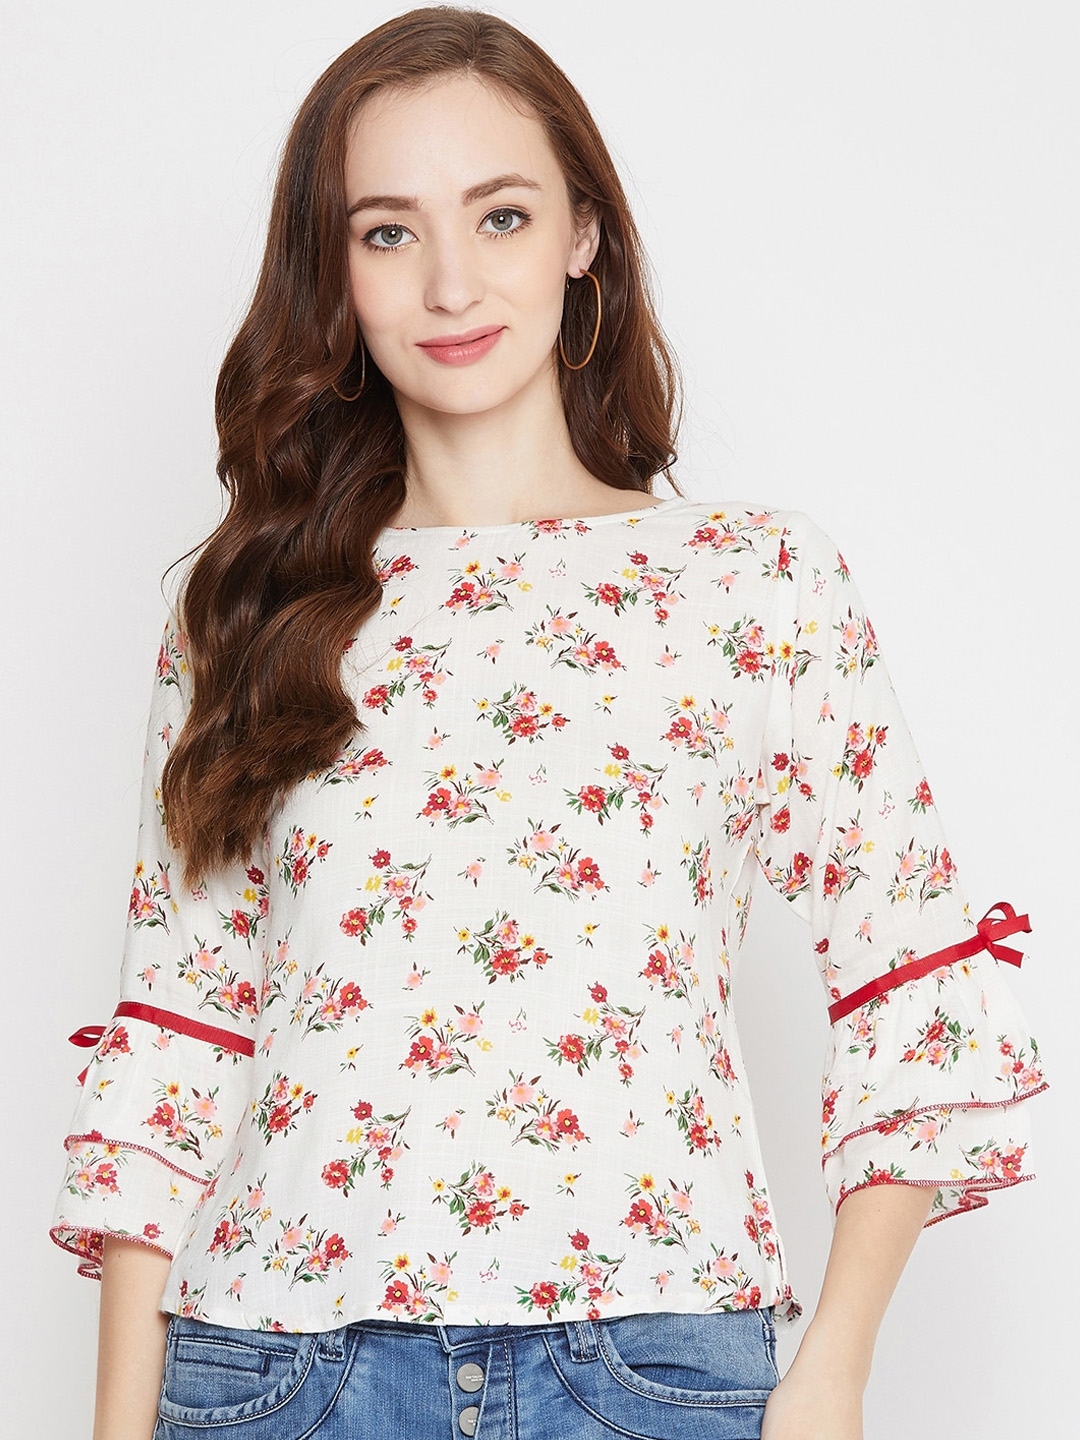 Buy WineRed White & Red Floral Print Top - Tops for Women 13533698 | Myntra